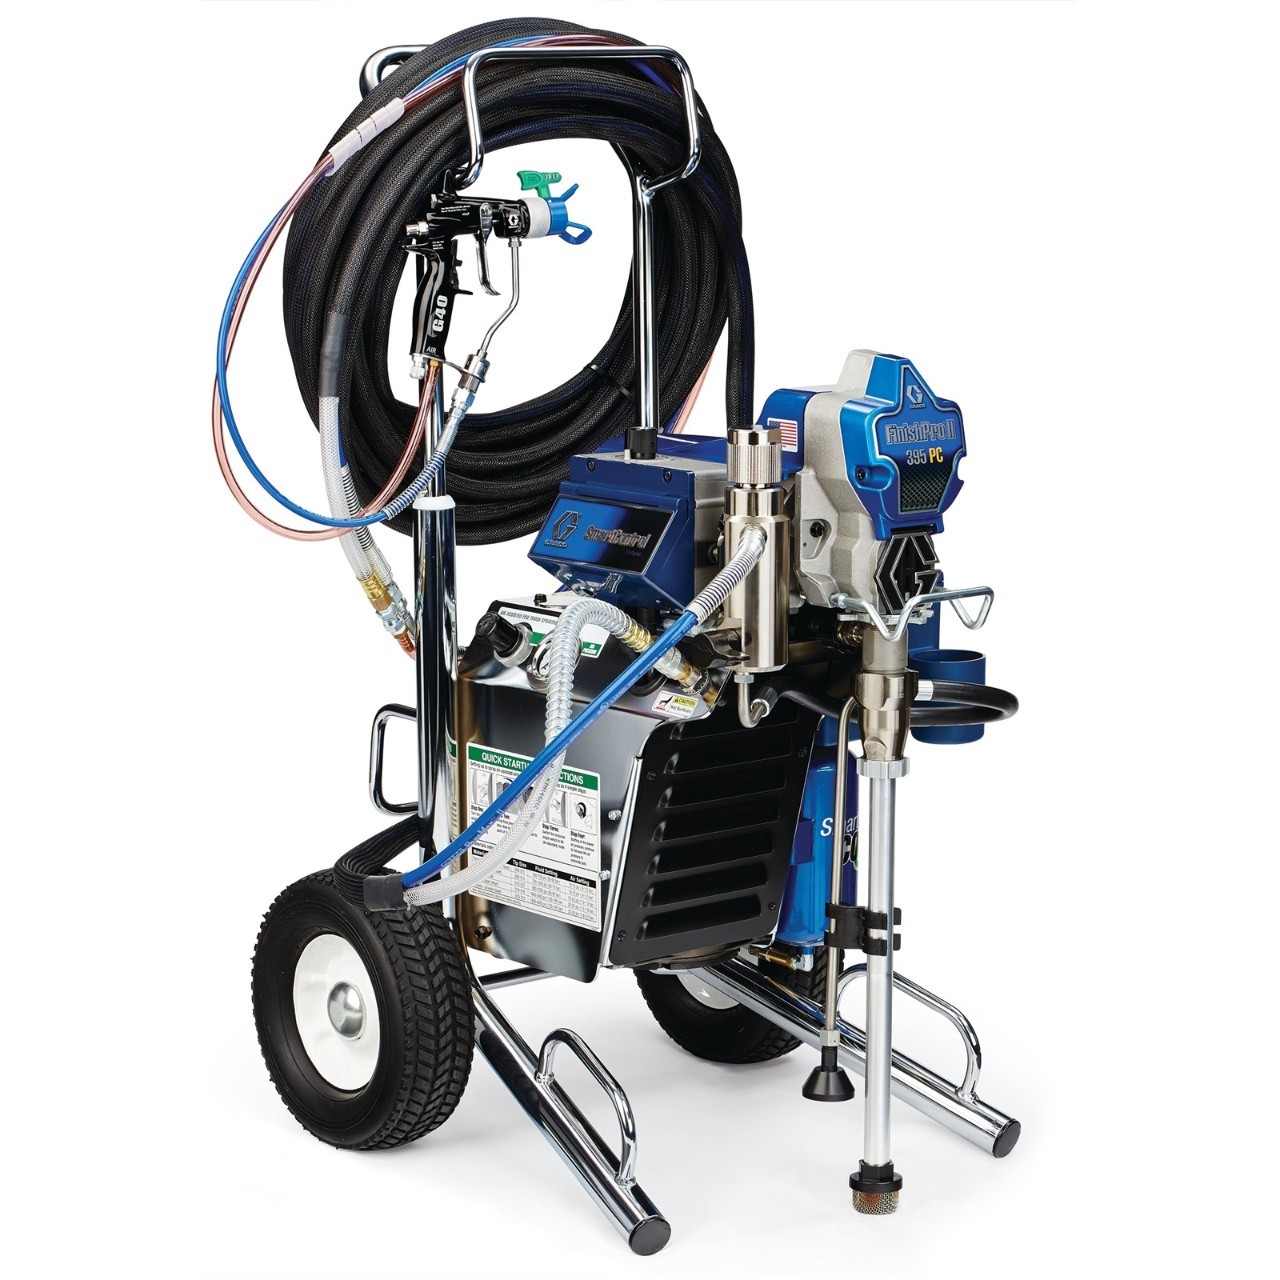 FinishPro II Air-Assisted Airless Sprayers